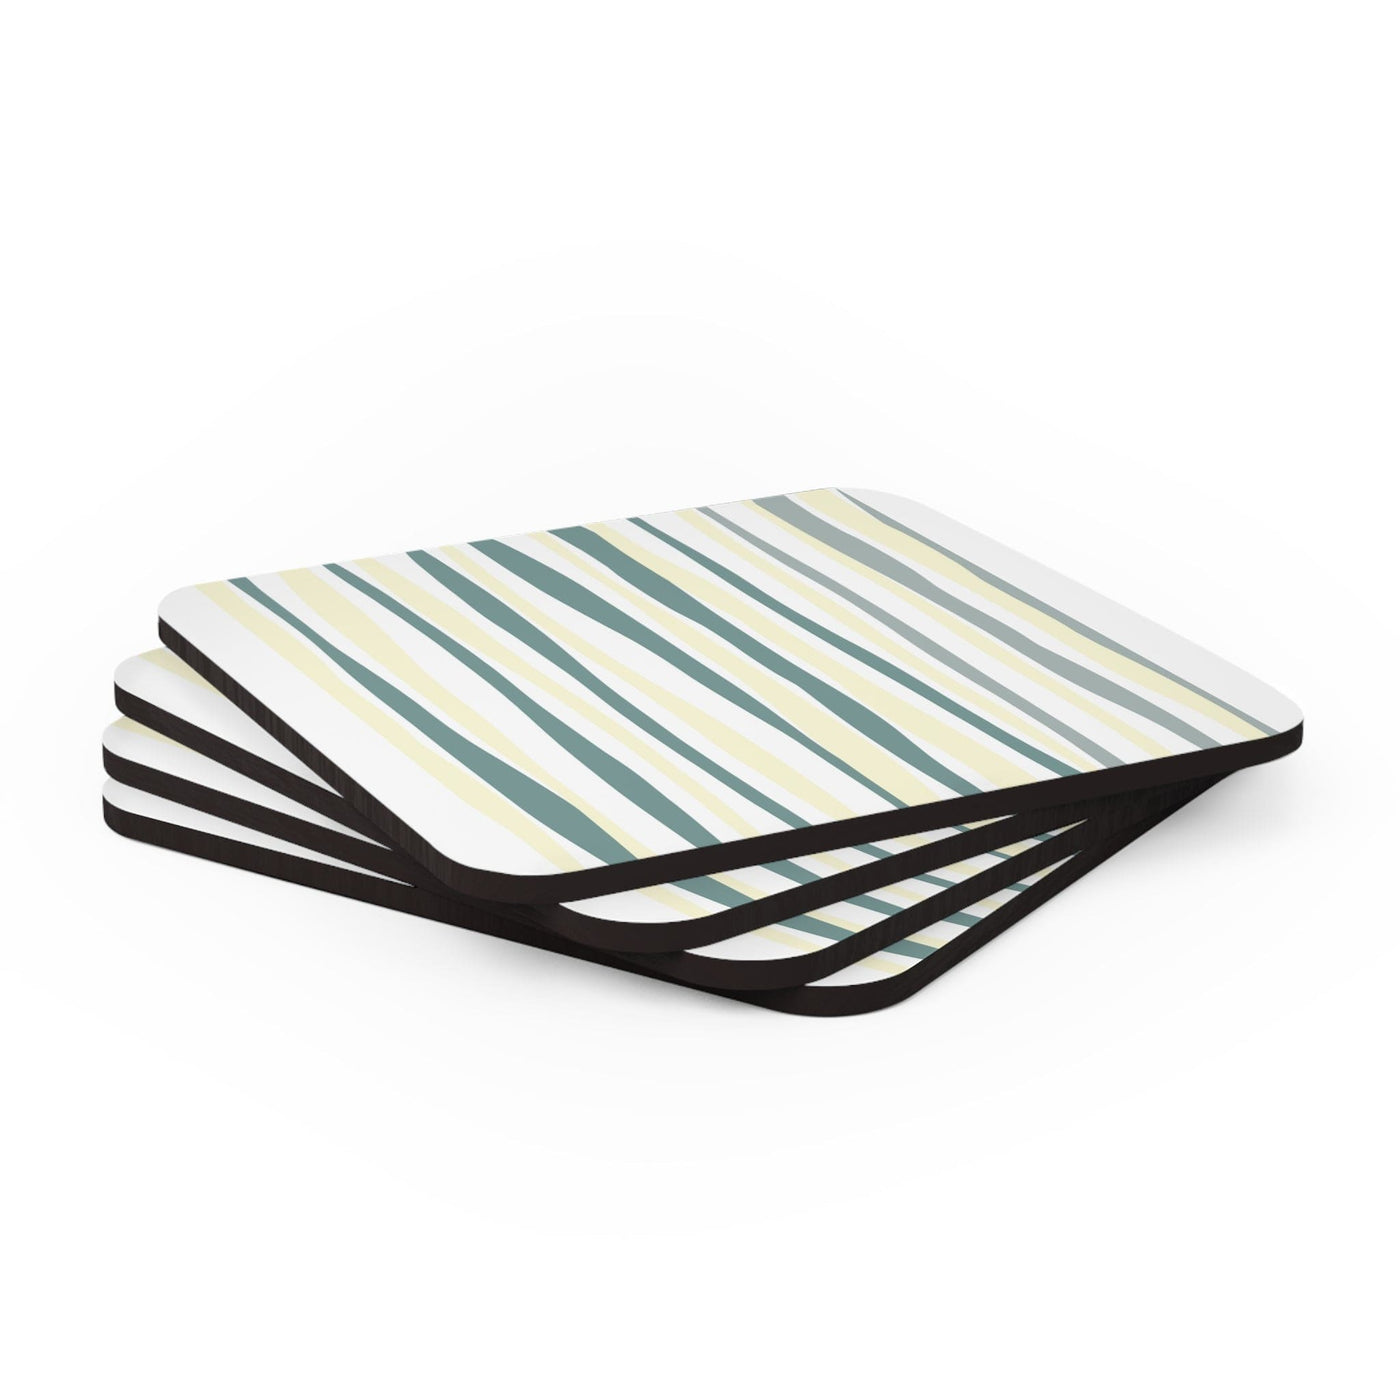 Coaster Set Of 4 For Drinks Yellow And Mint Stripe Abstract Art - Decorative